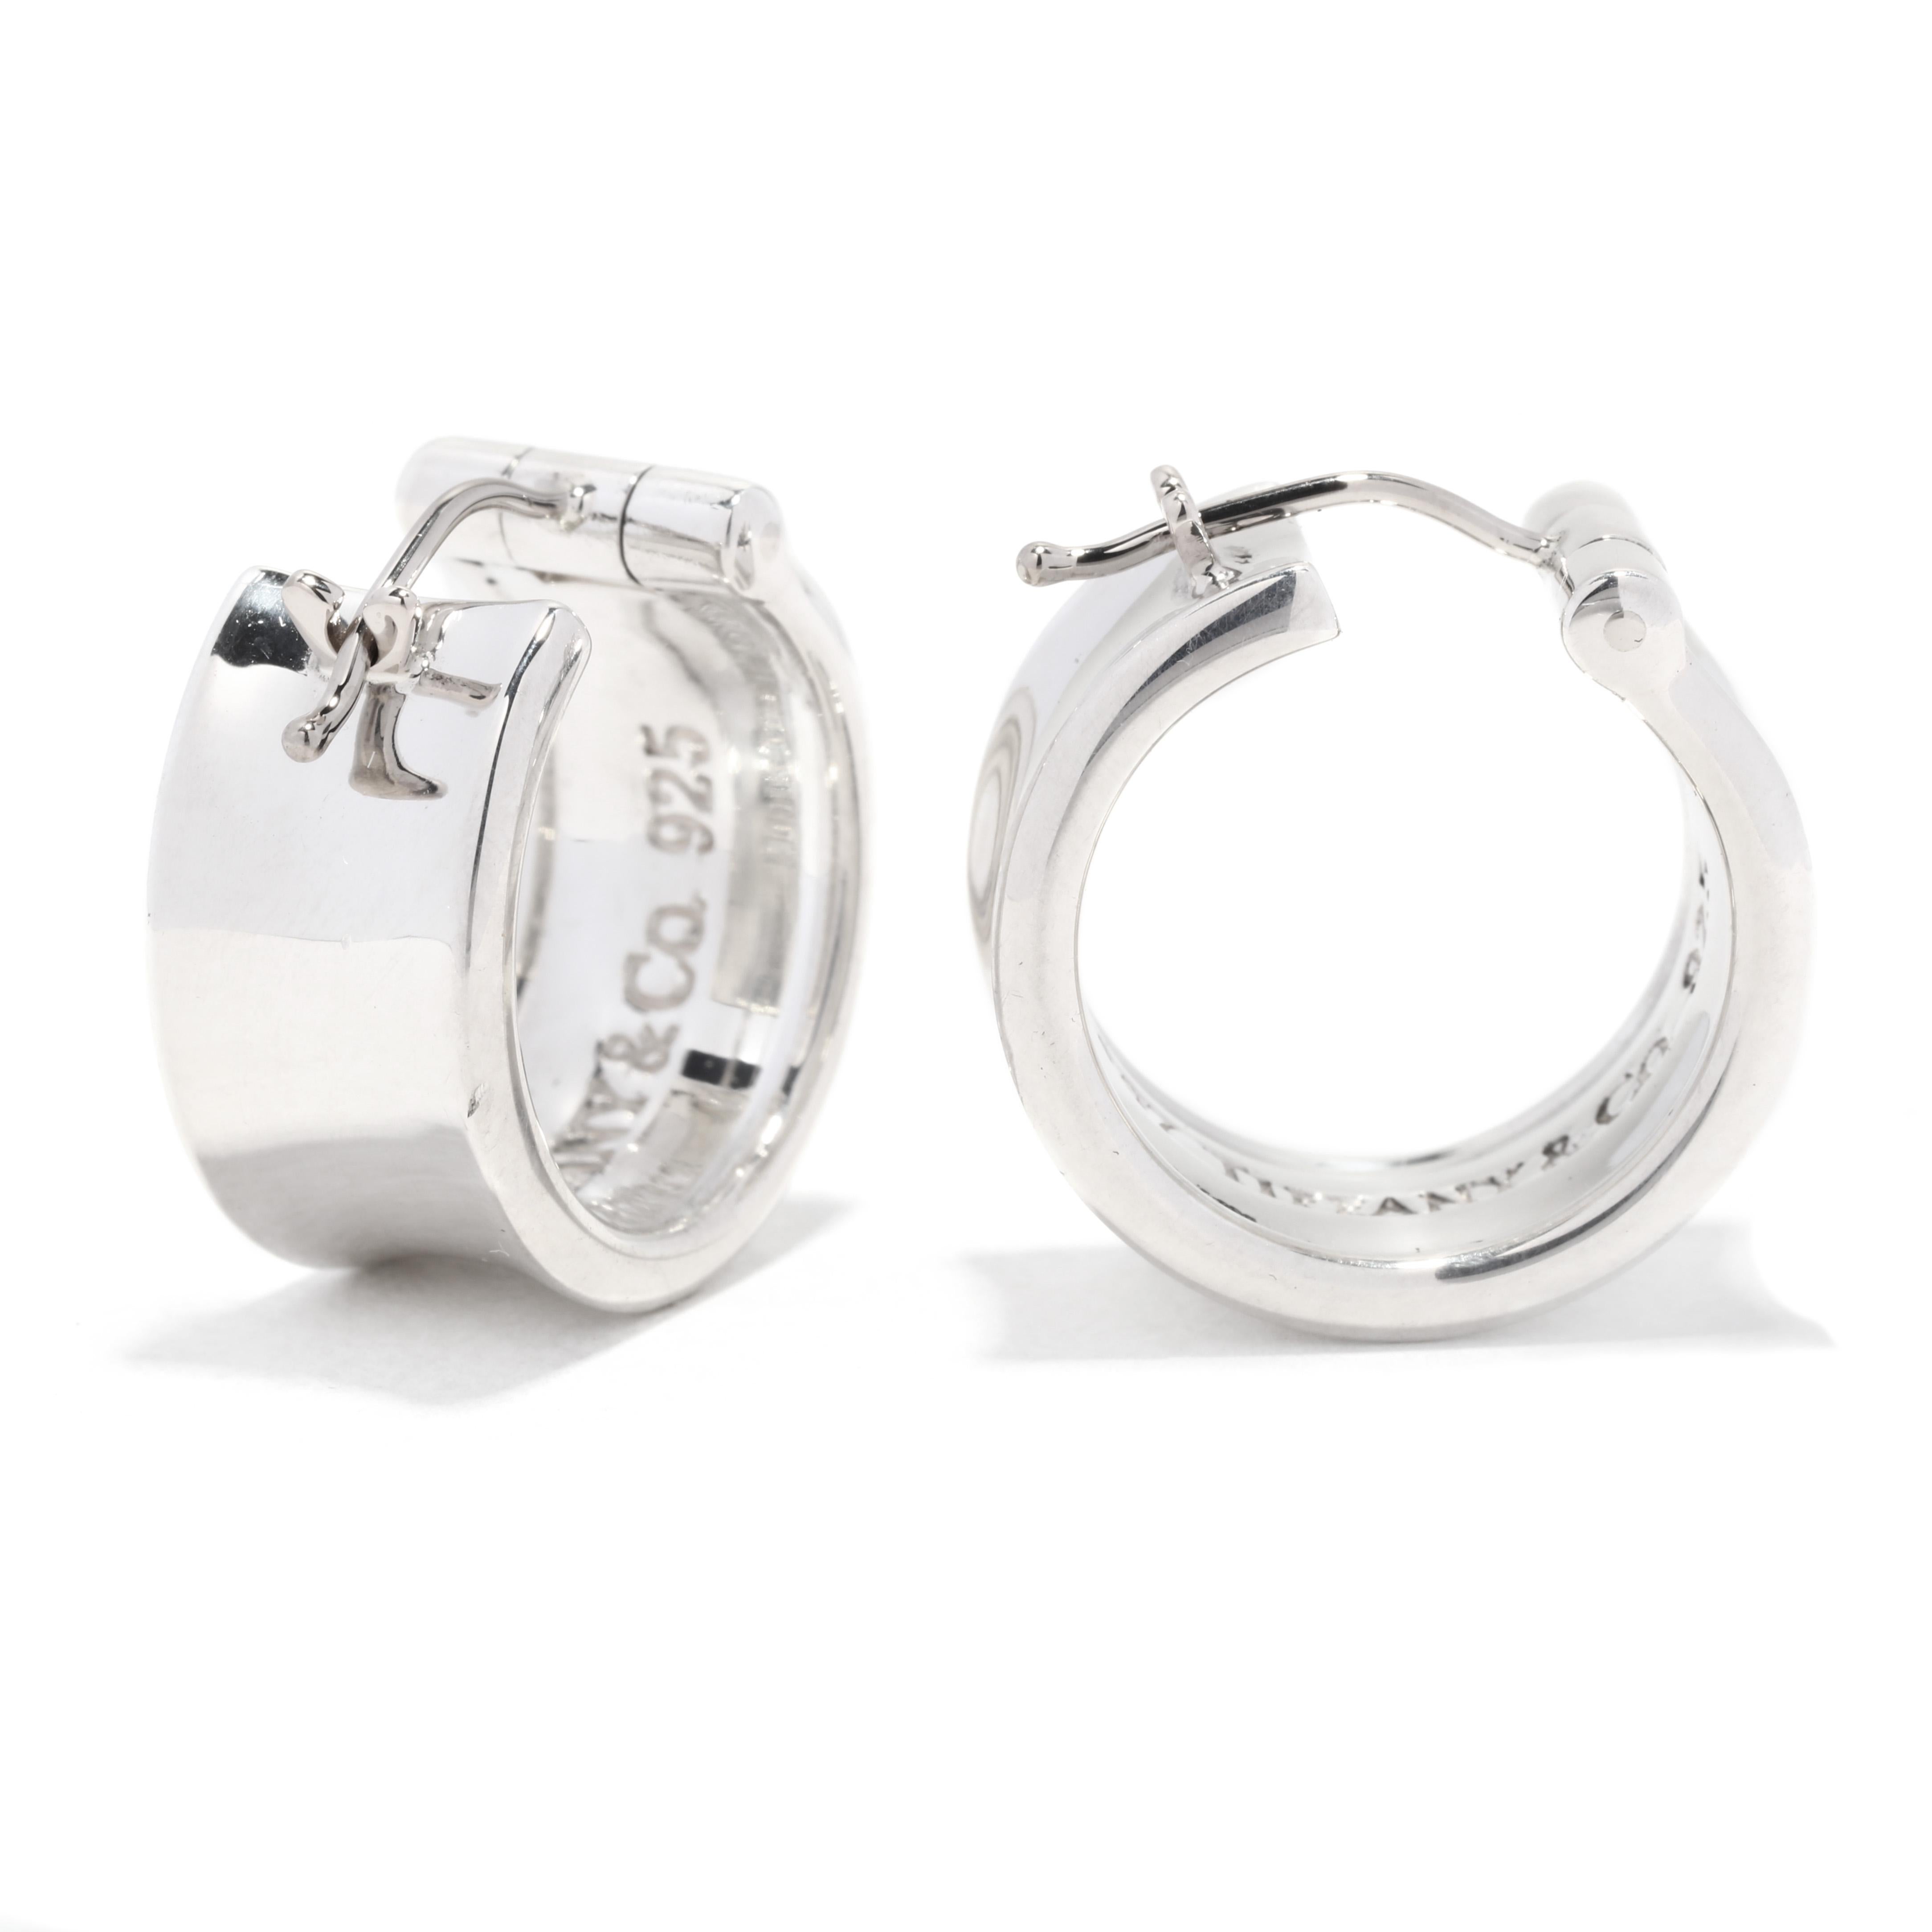 A pair of vintage Tiffany and Company sterling silver wide hoop earrings. These small silver hoops feature a wide, concave design with stamps on the outer edge of 1997, T & Co, and 925.

Length: 3/4 in.

Width: 3/8 in.

Weight: 9.5 dwts. / 14.77